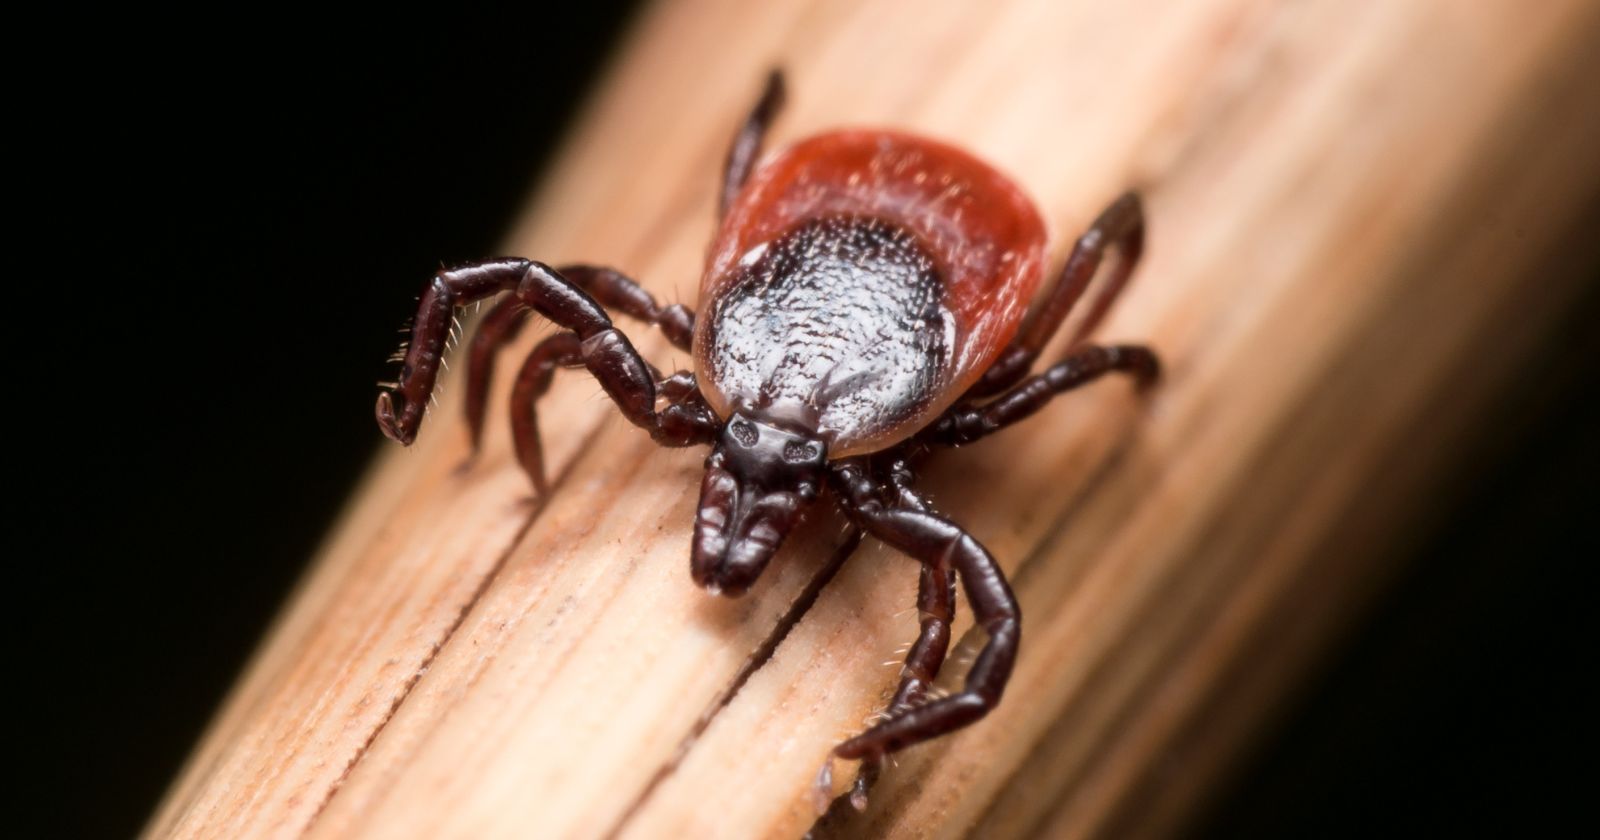 How do you get rid of a tick?  3 tips to know.